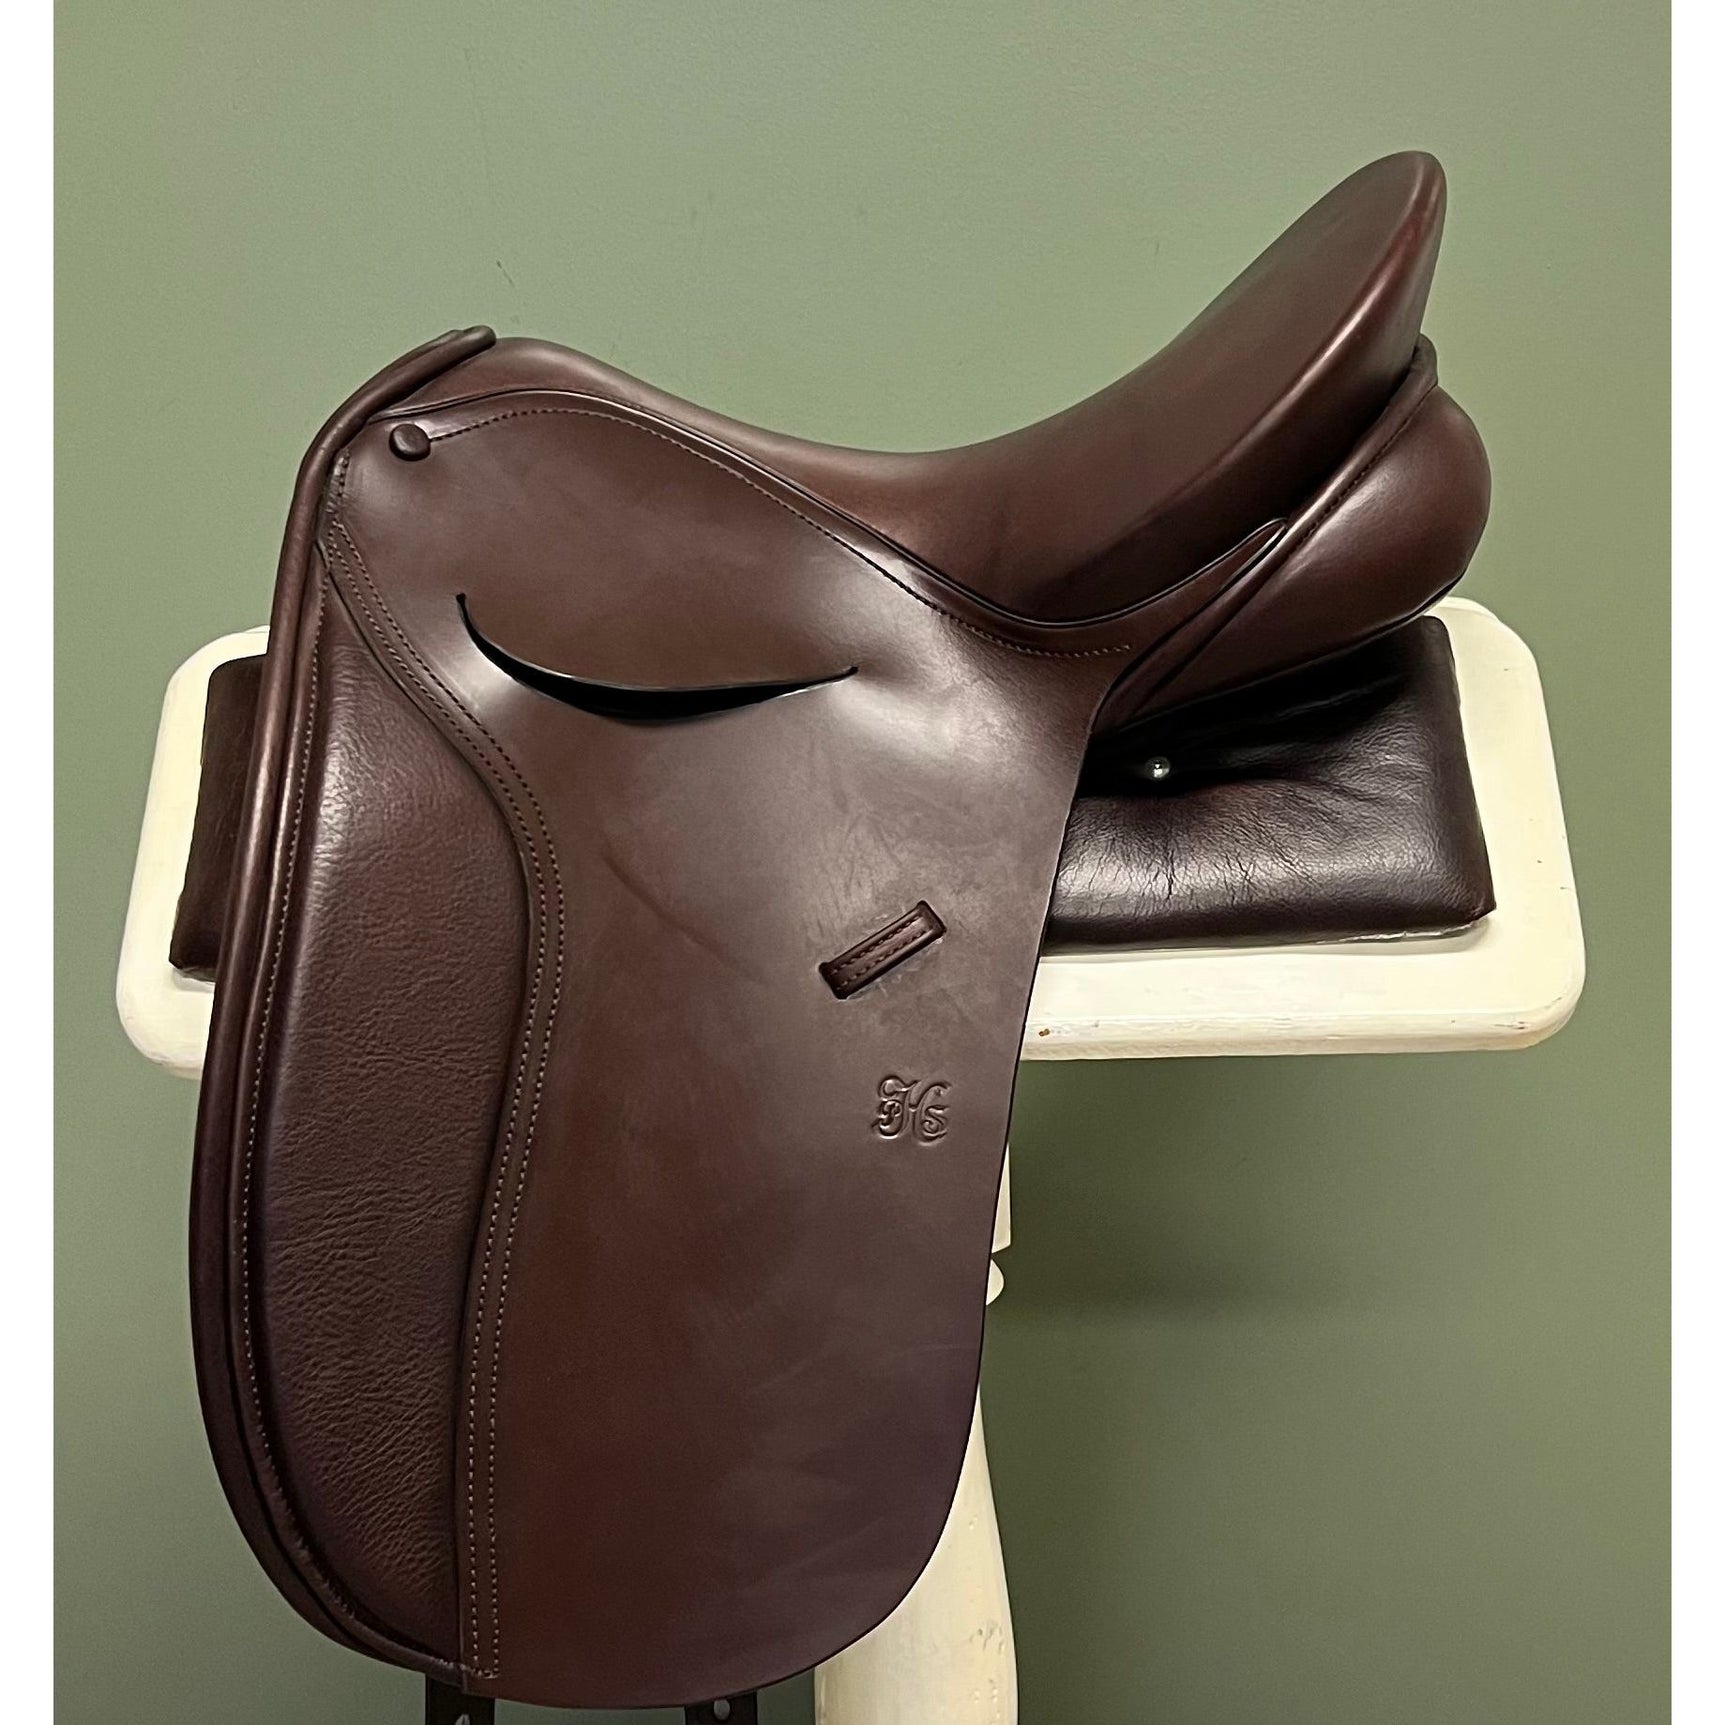 STOCK CLEARANCE Ph Royal 2 Saddle in Chestnut Size 16"